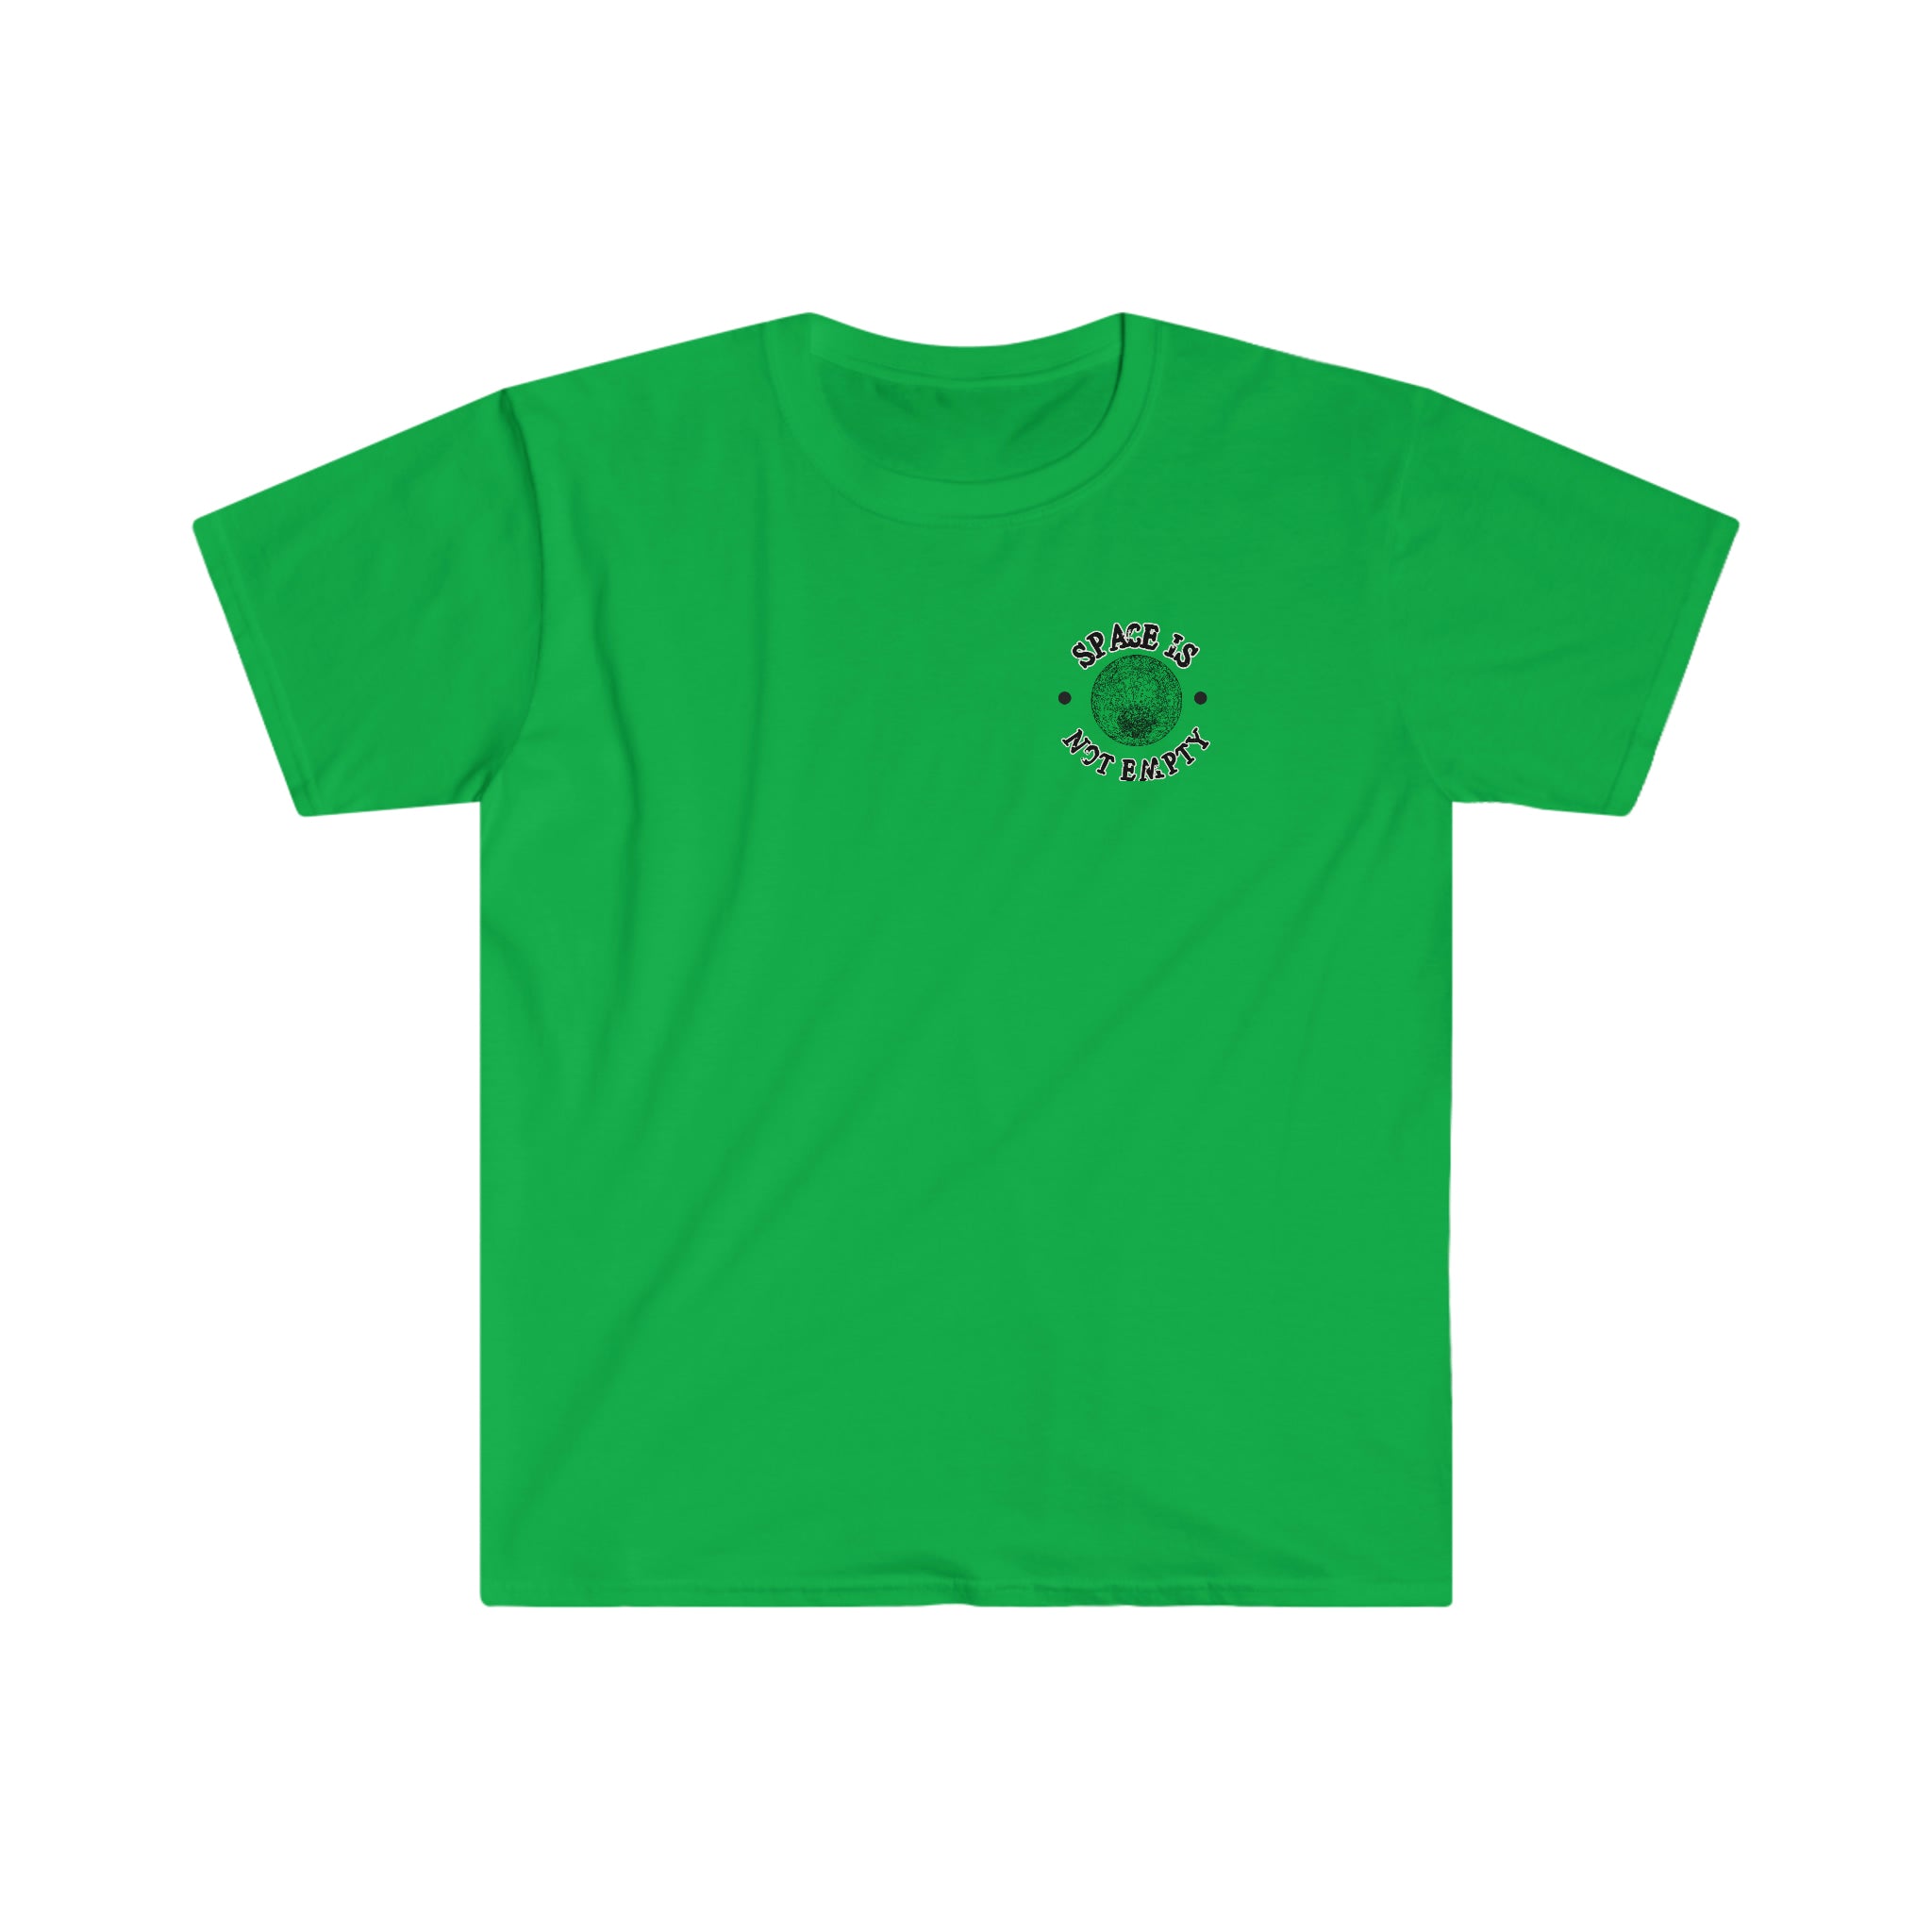 A Space is my goal T-Shirt with a green flower on it, adding a touch of style to any wardrobe.